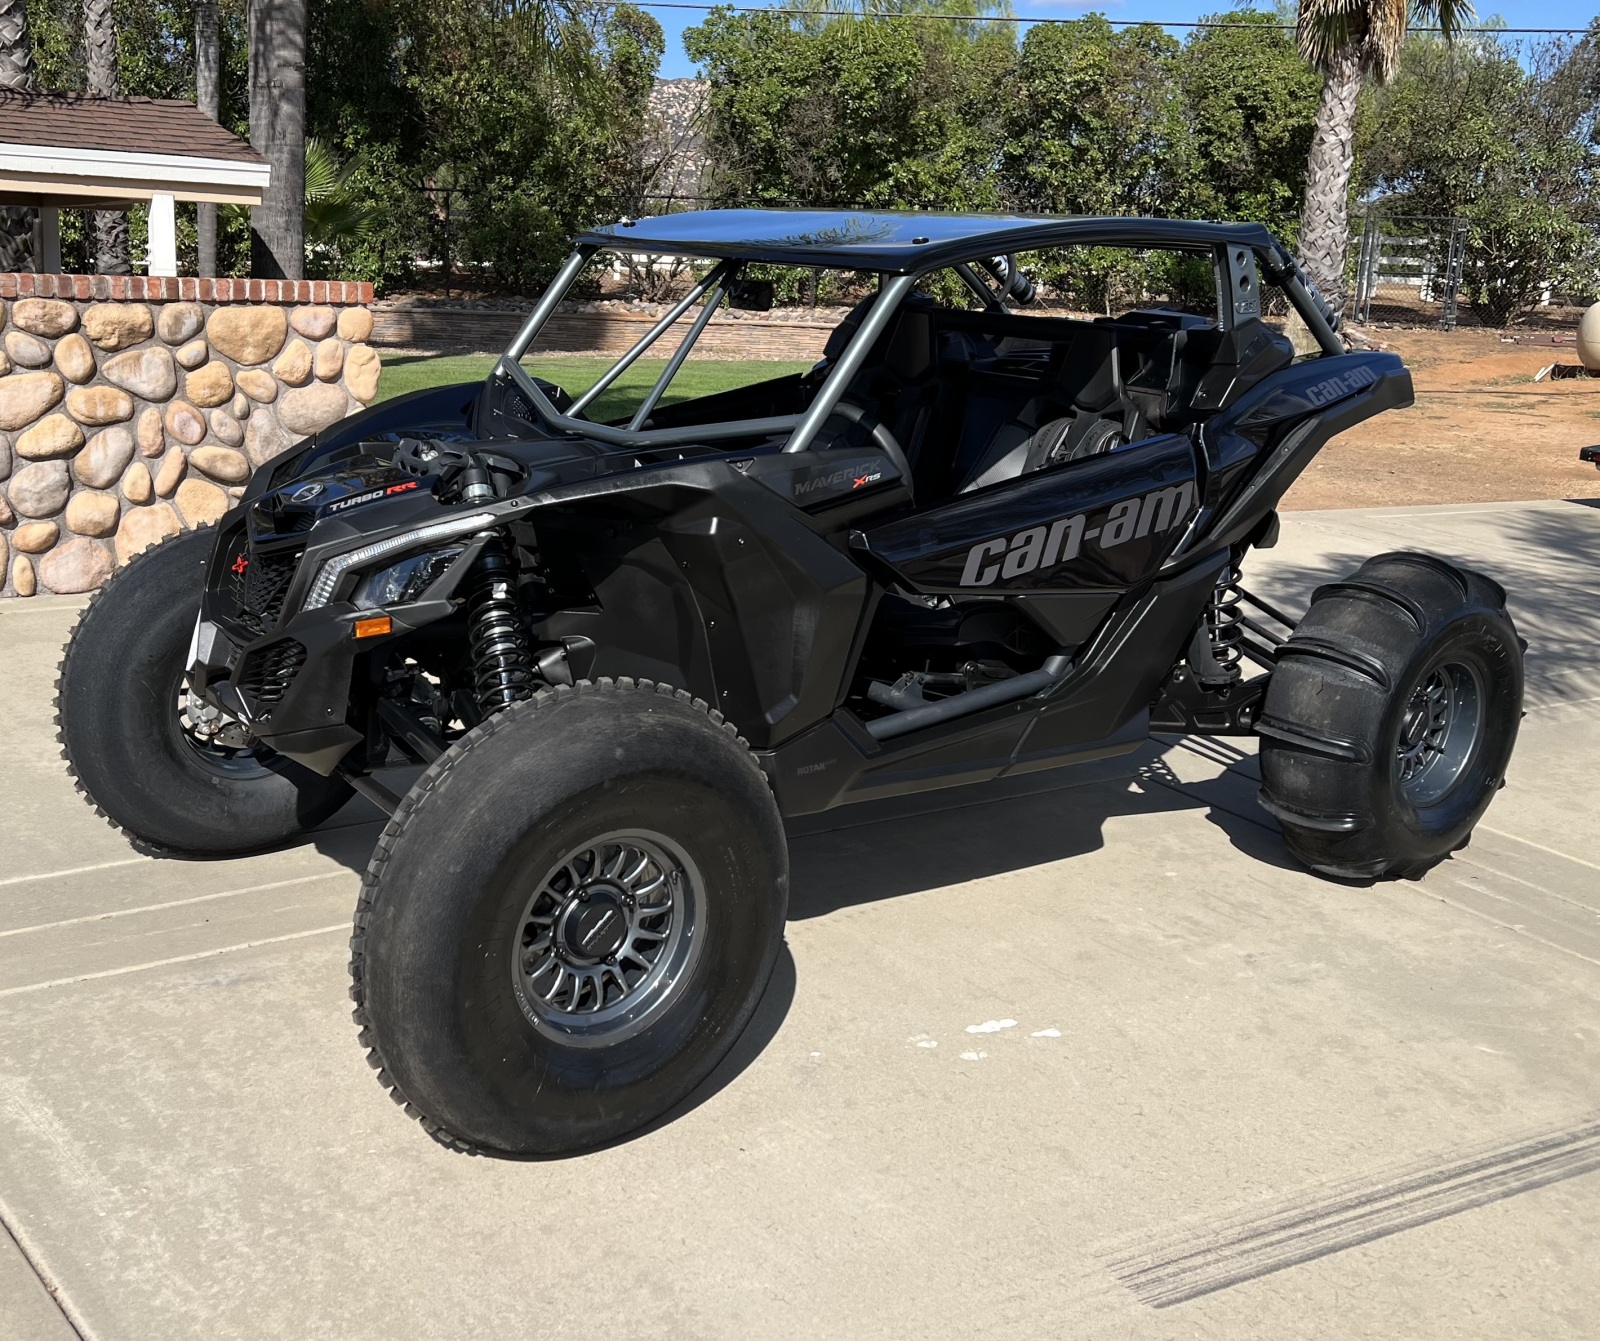 For Sale: Can-am X3 2 seat roll cage only forsale - photo0